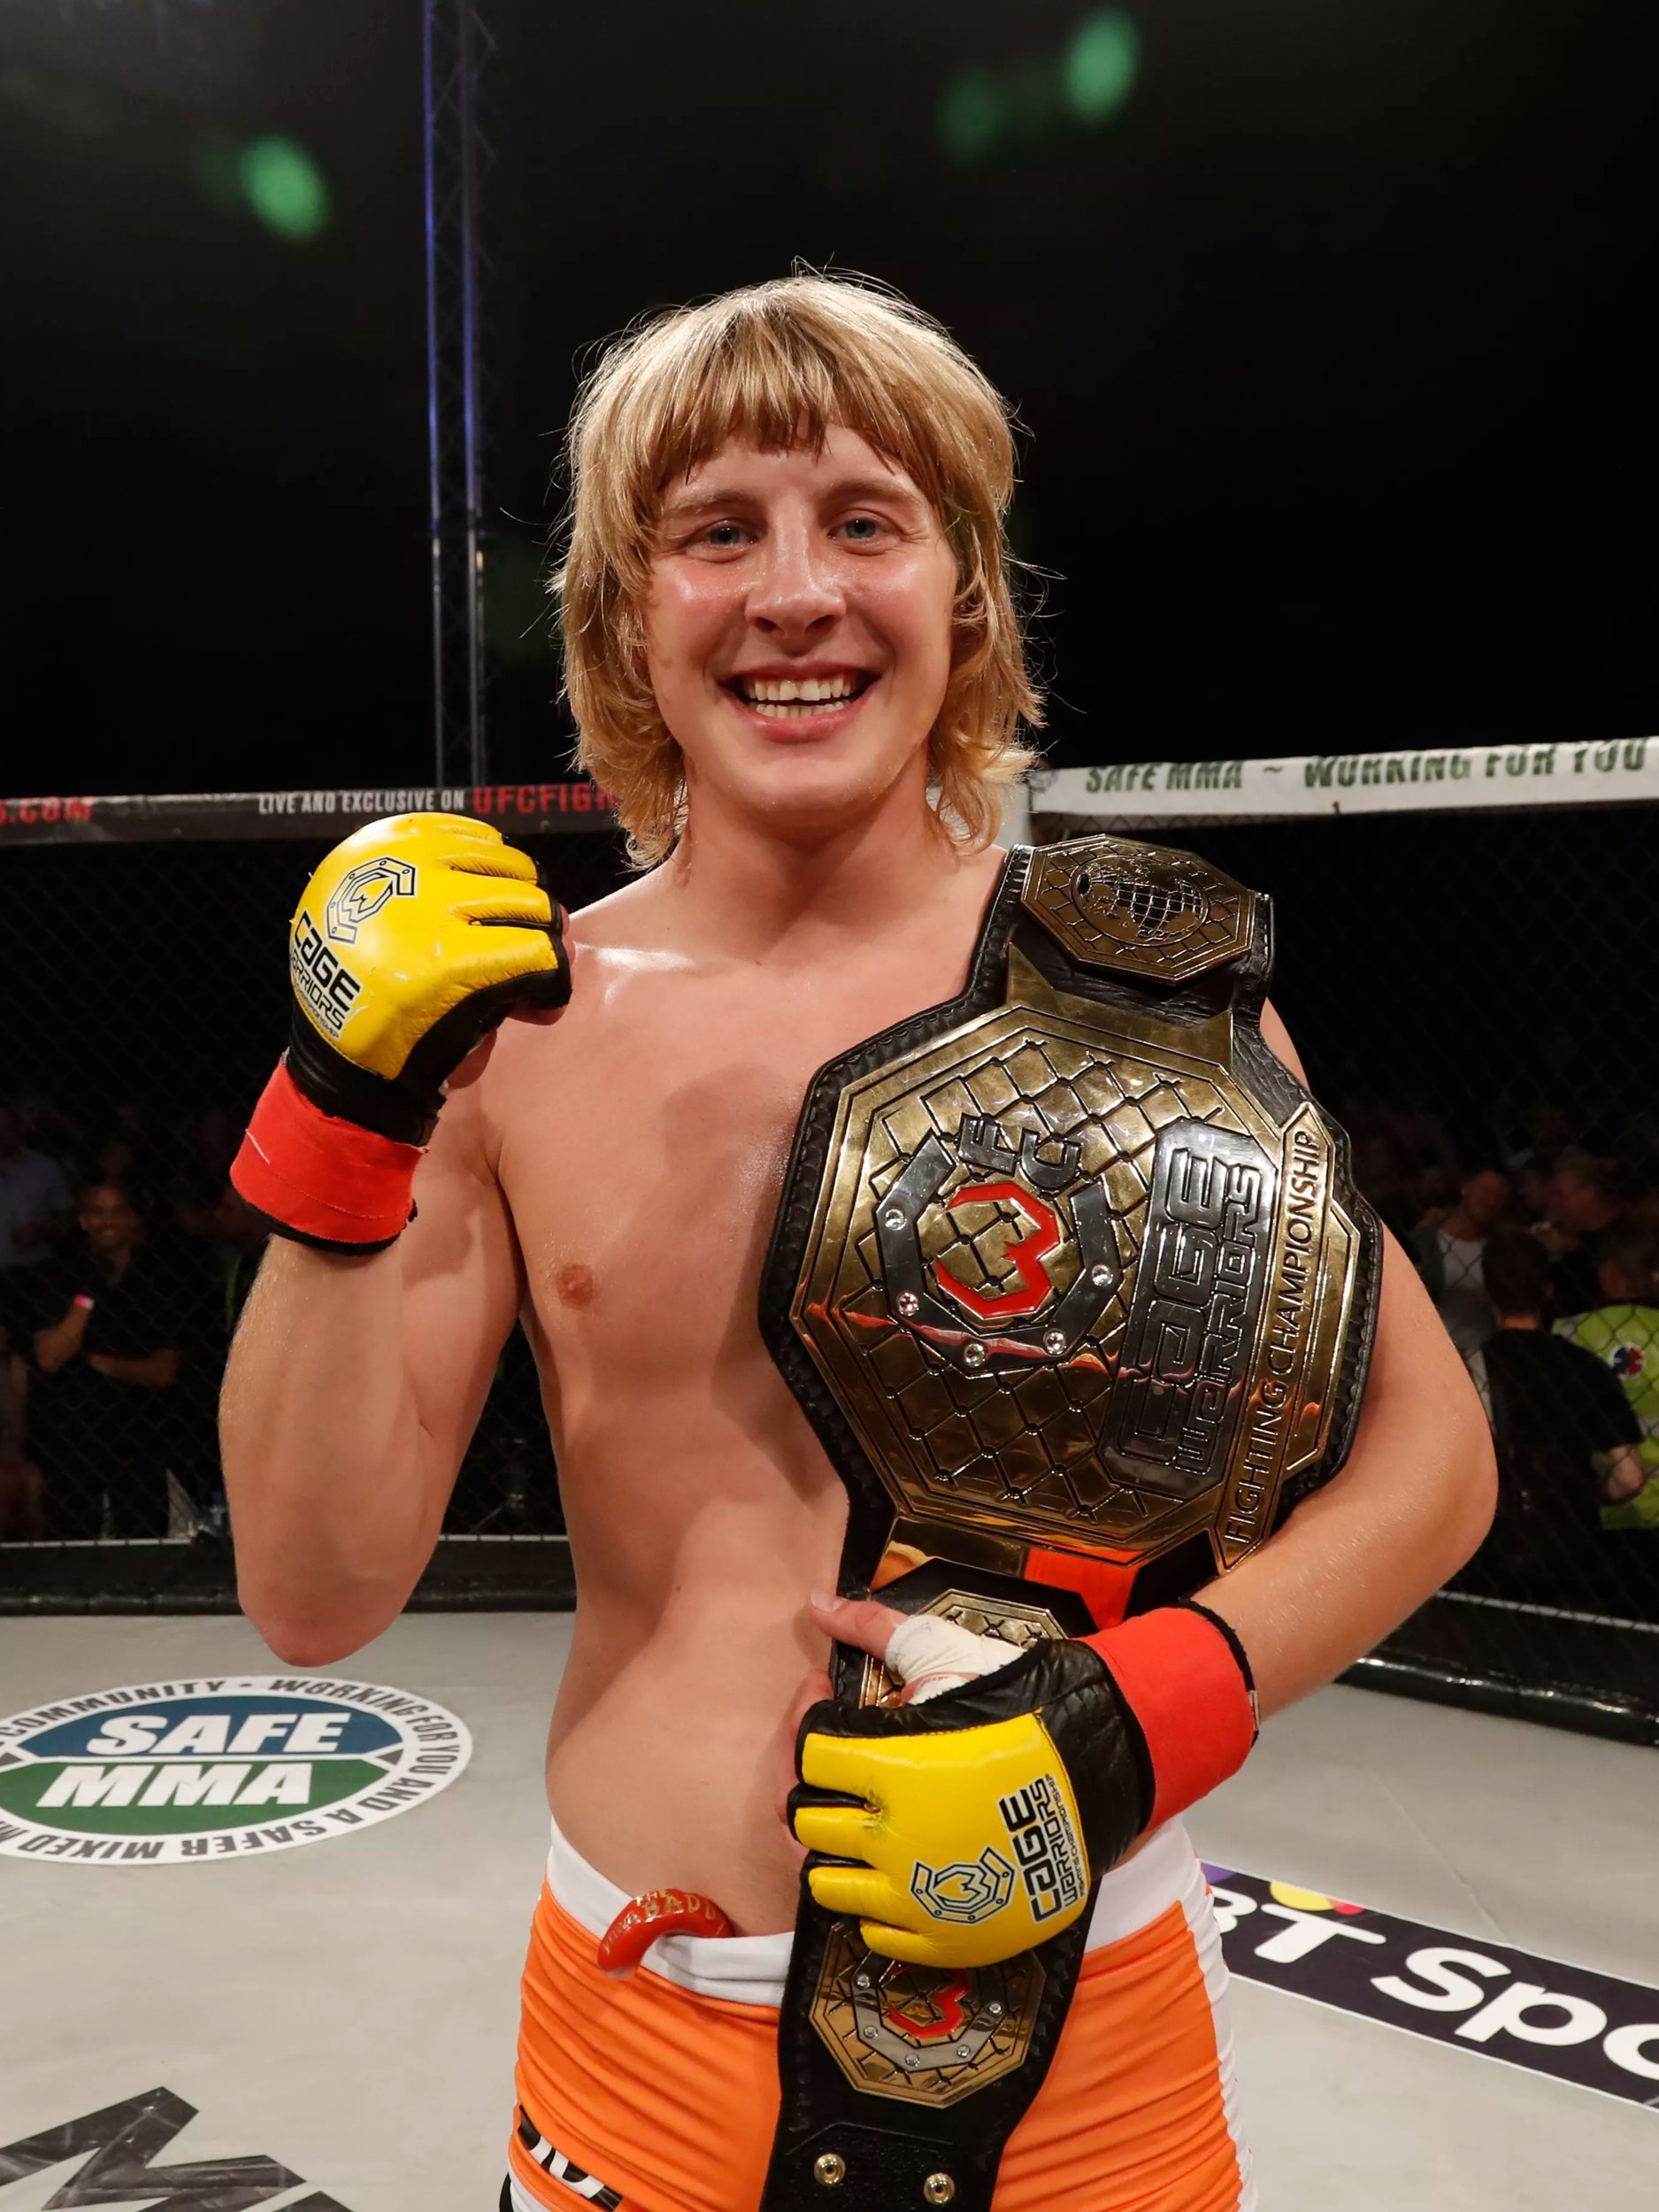 Paddy Pimblett From Khabib To Colby Covington, 5 UFC Fighters The Baddy Hates